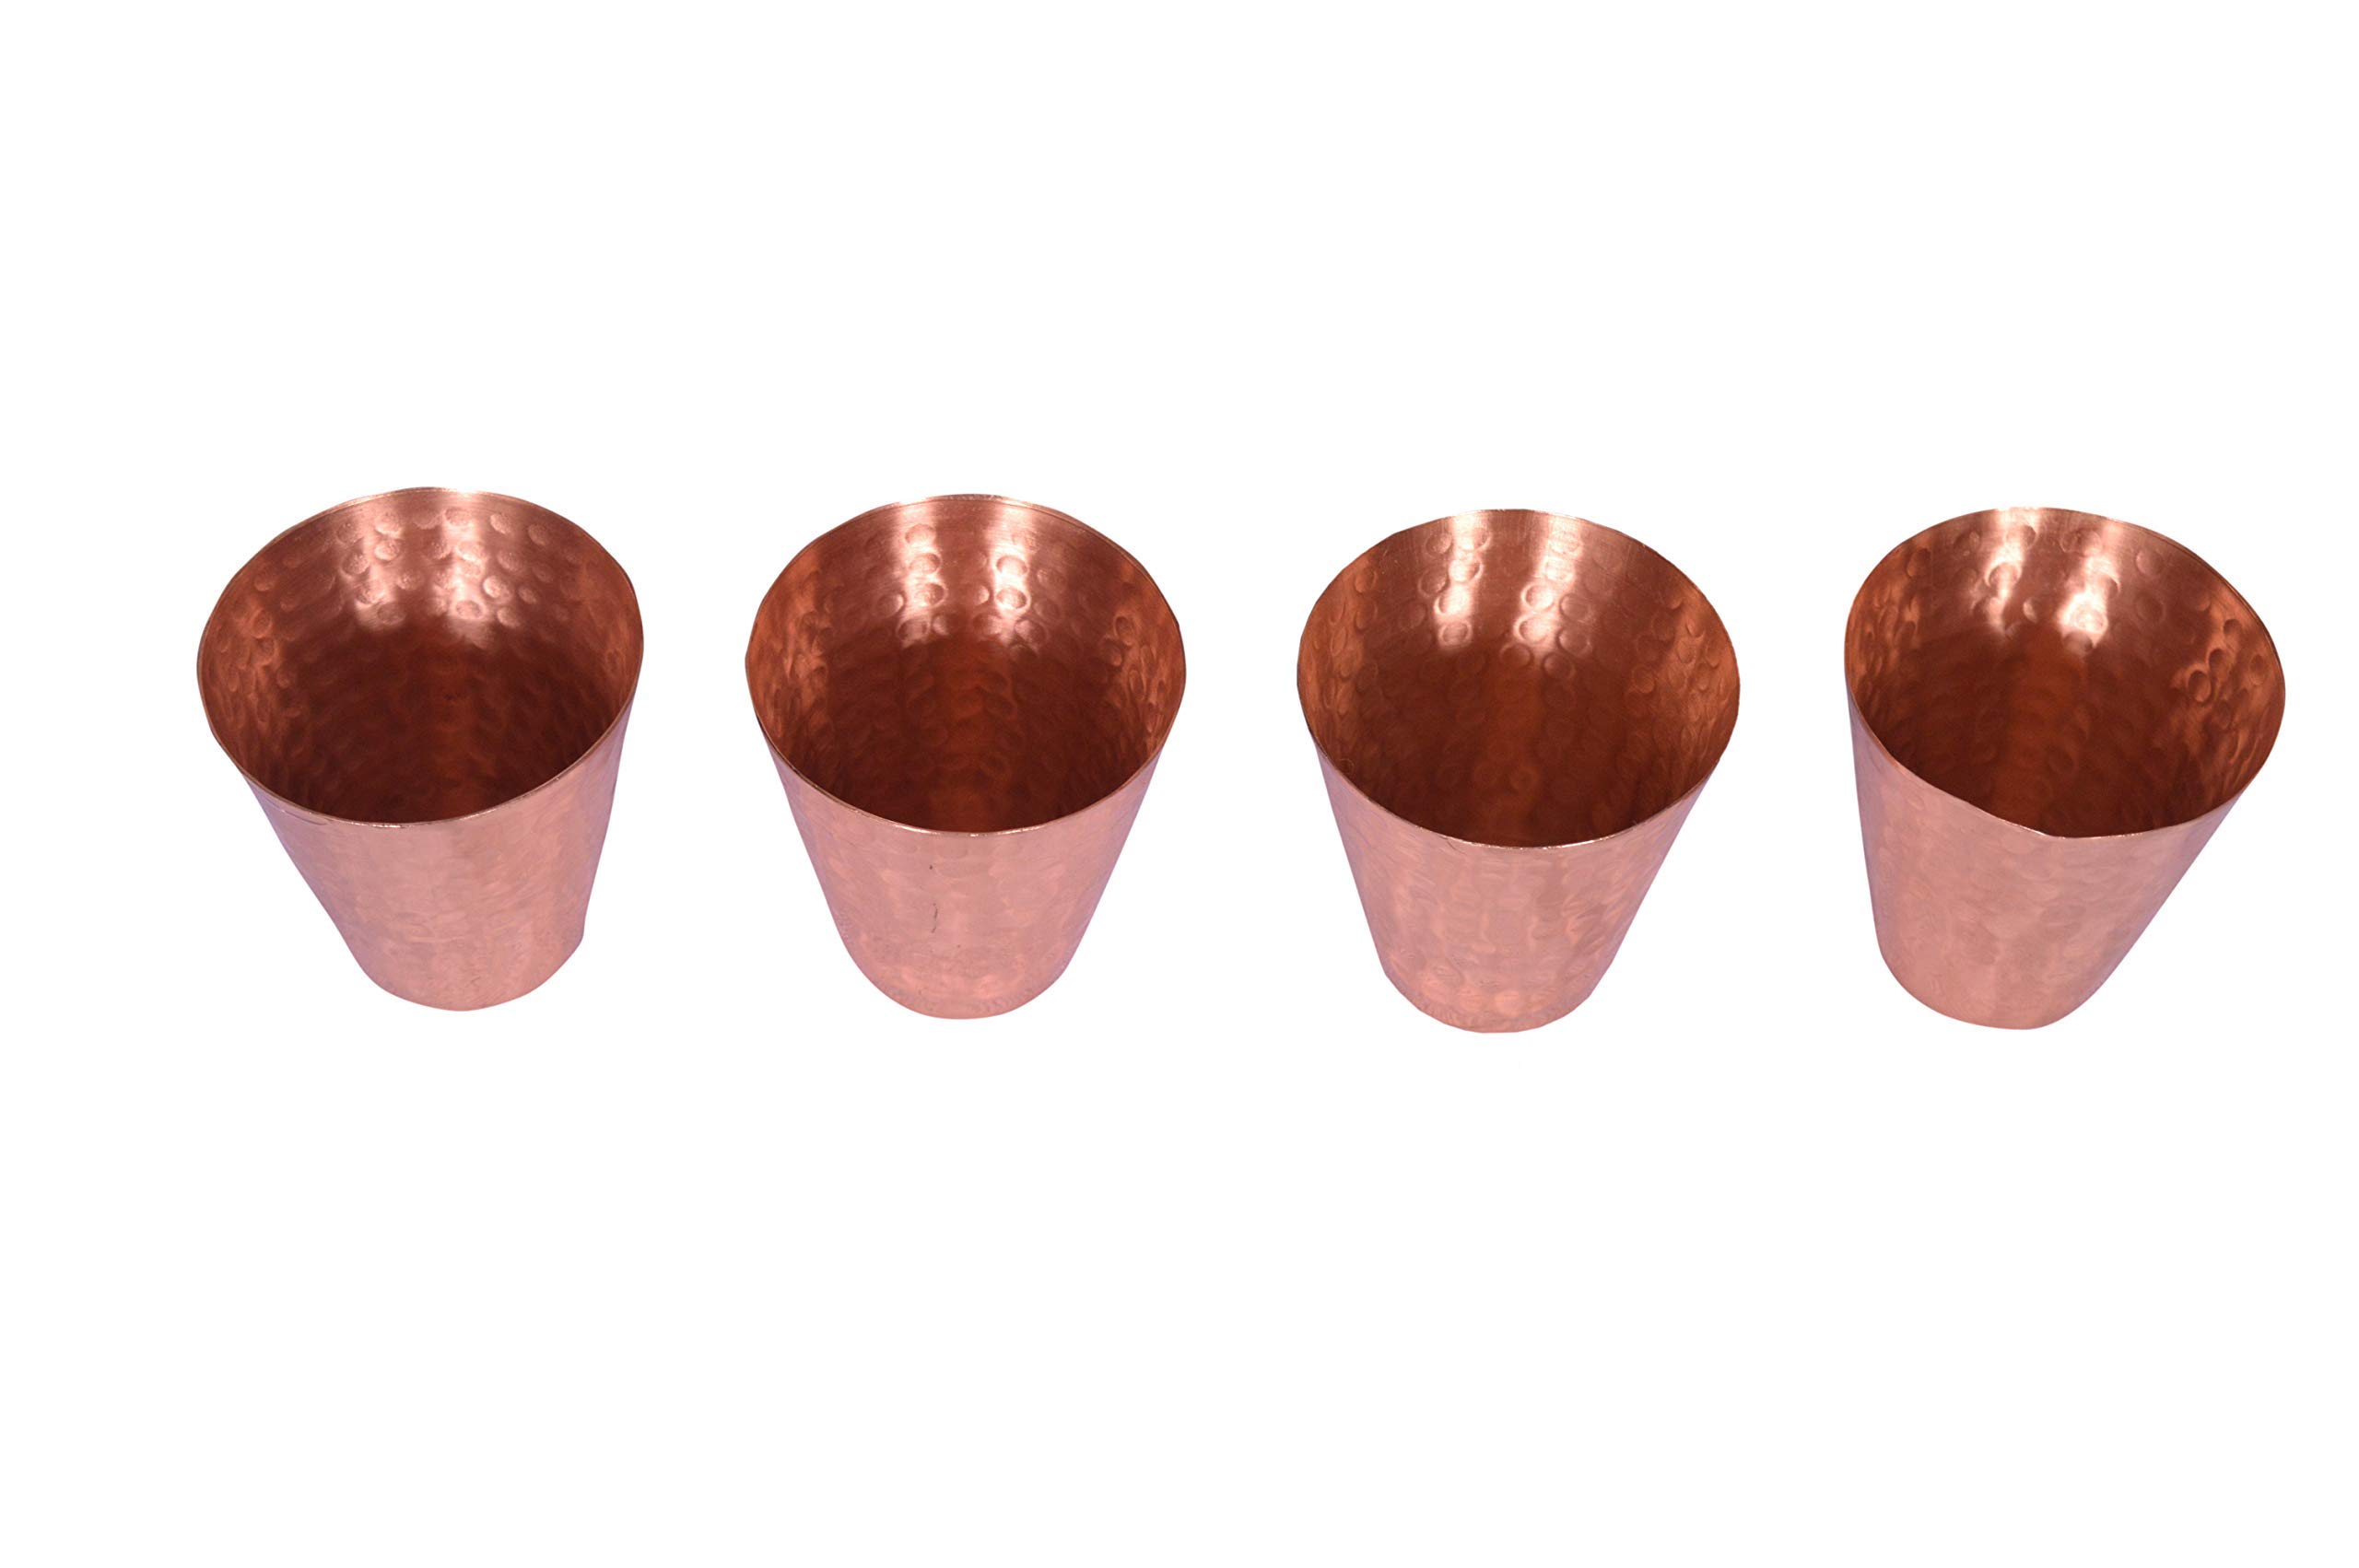 Generic Copper Essentials Mascow Mule Hammered Copper Shot Glasses(Set Of 4) 100% Pure Copper With Gift Boxes